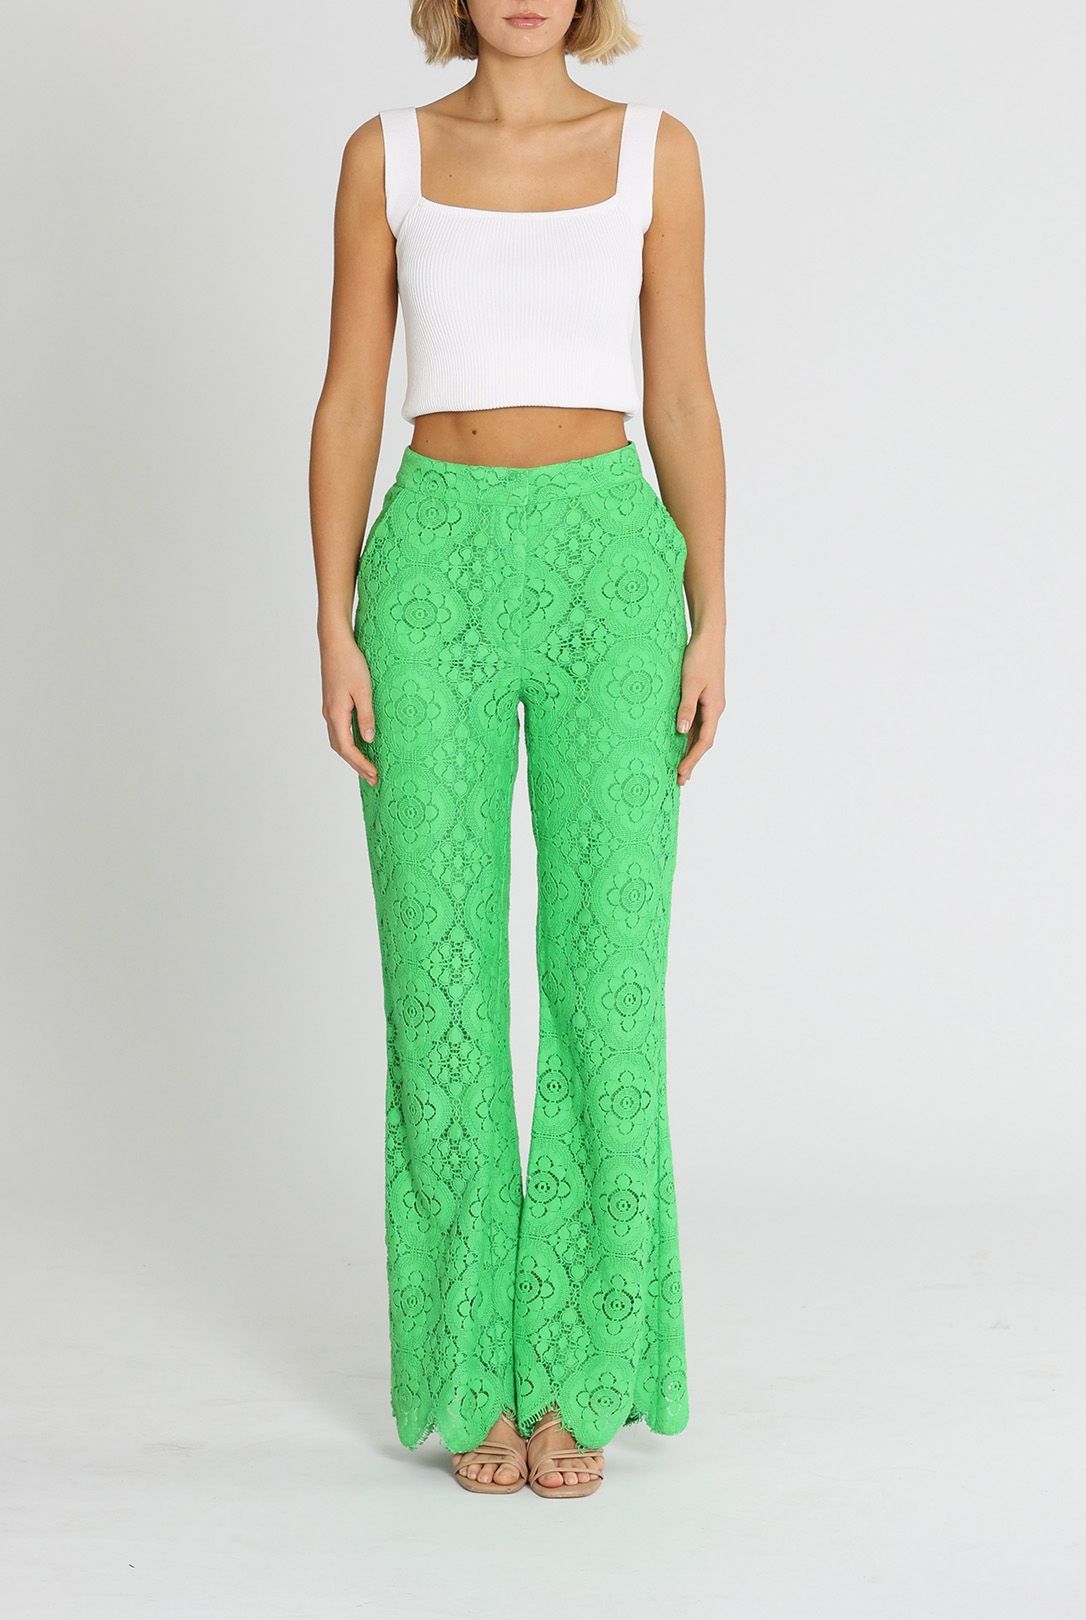 Alice McCall Yvonne Lace Pants Lime